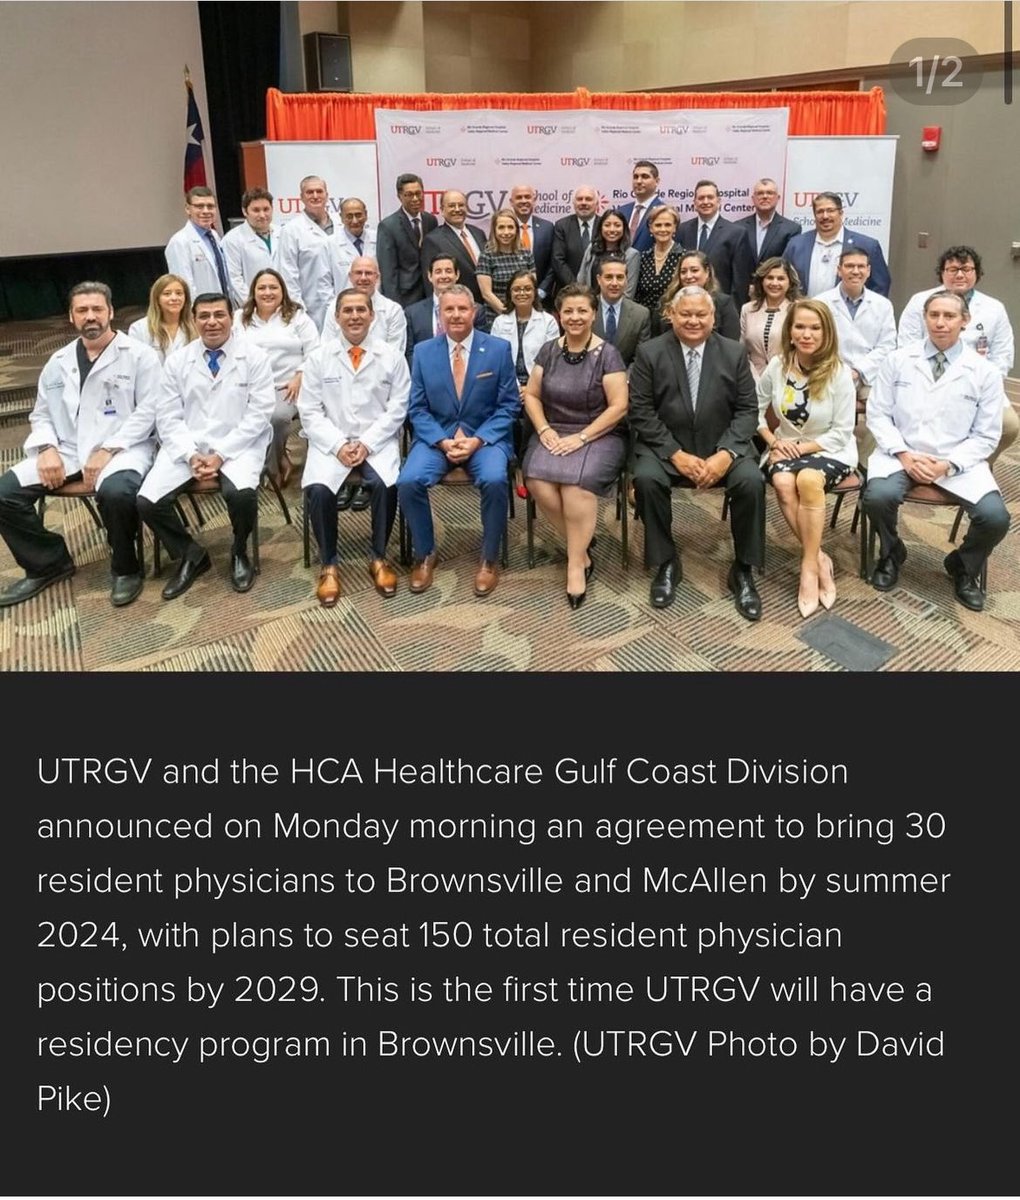 Attention everyone! We have a new sister program who is looking for new candidates. The inaugural group of 13 resident physicians will be welcomed to the newly established UTRGV-HCA Healthcare residency program to start in July 2024 at Brownsville [1404800005].